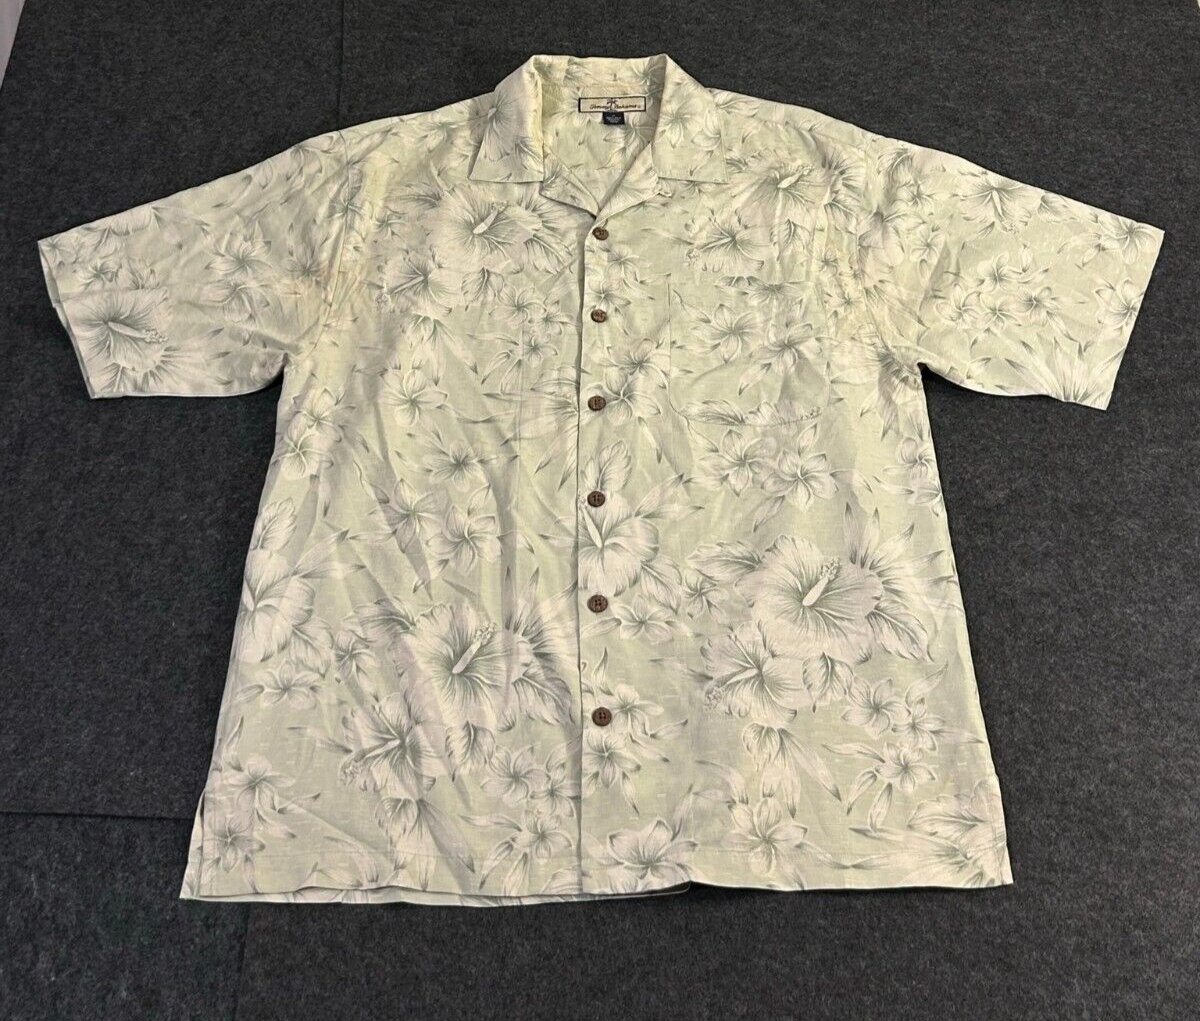 Primary image for Tommy Bahama Hawaiian Floral Silk Button Down Camp Shirt Men's Size Medium